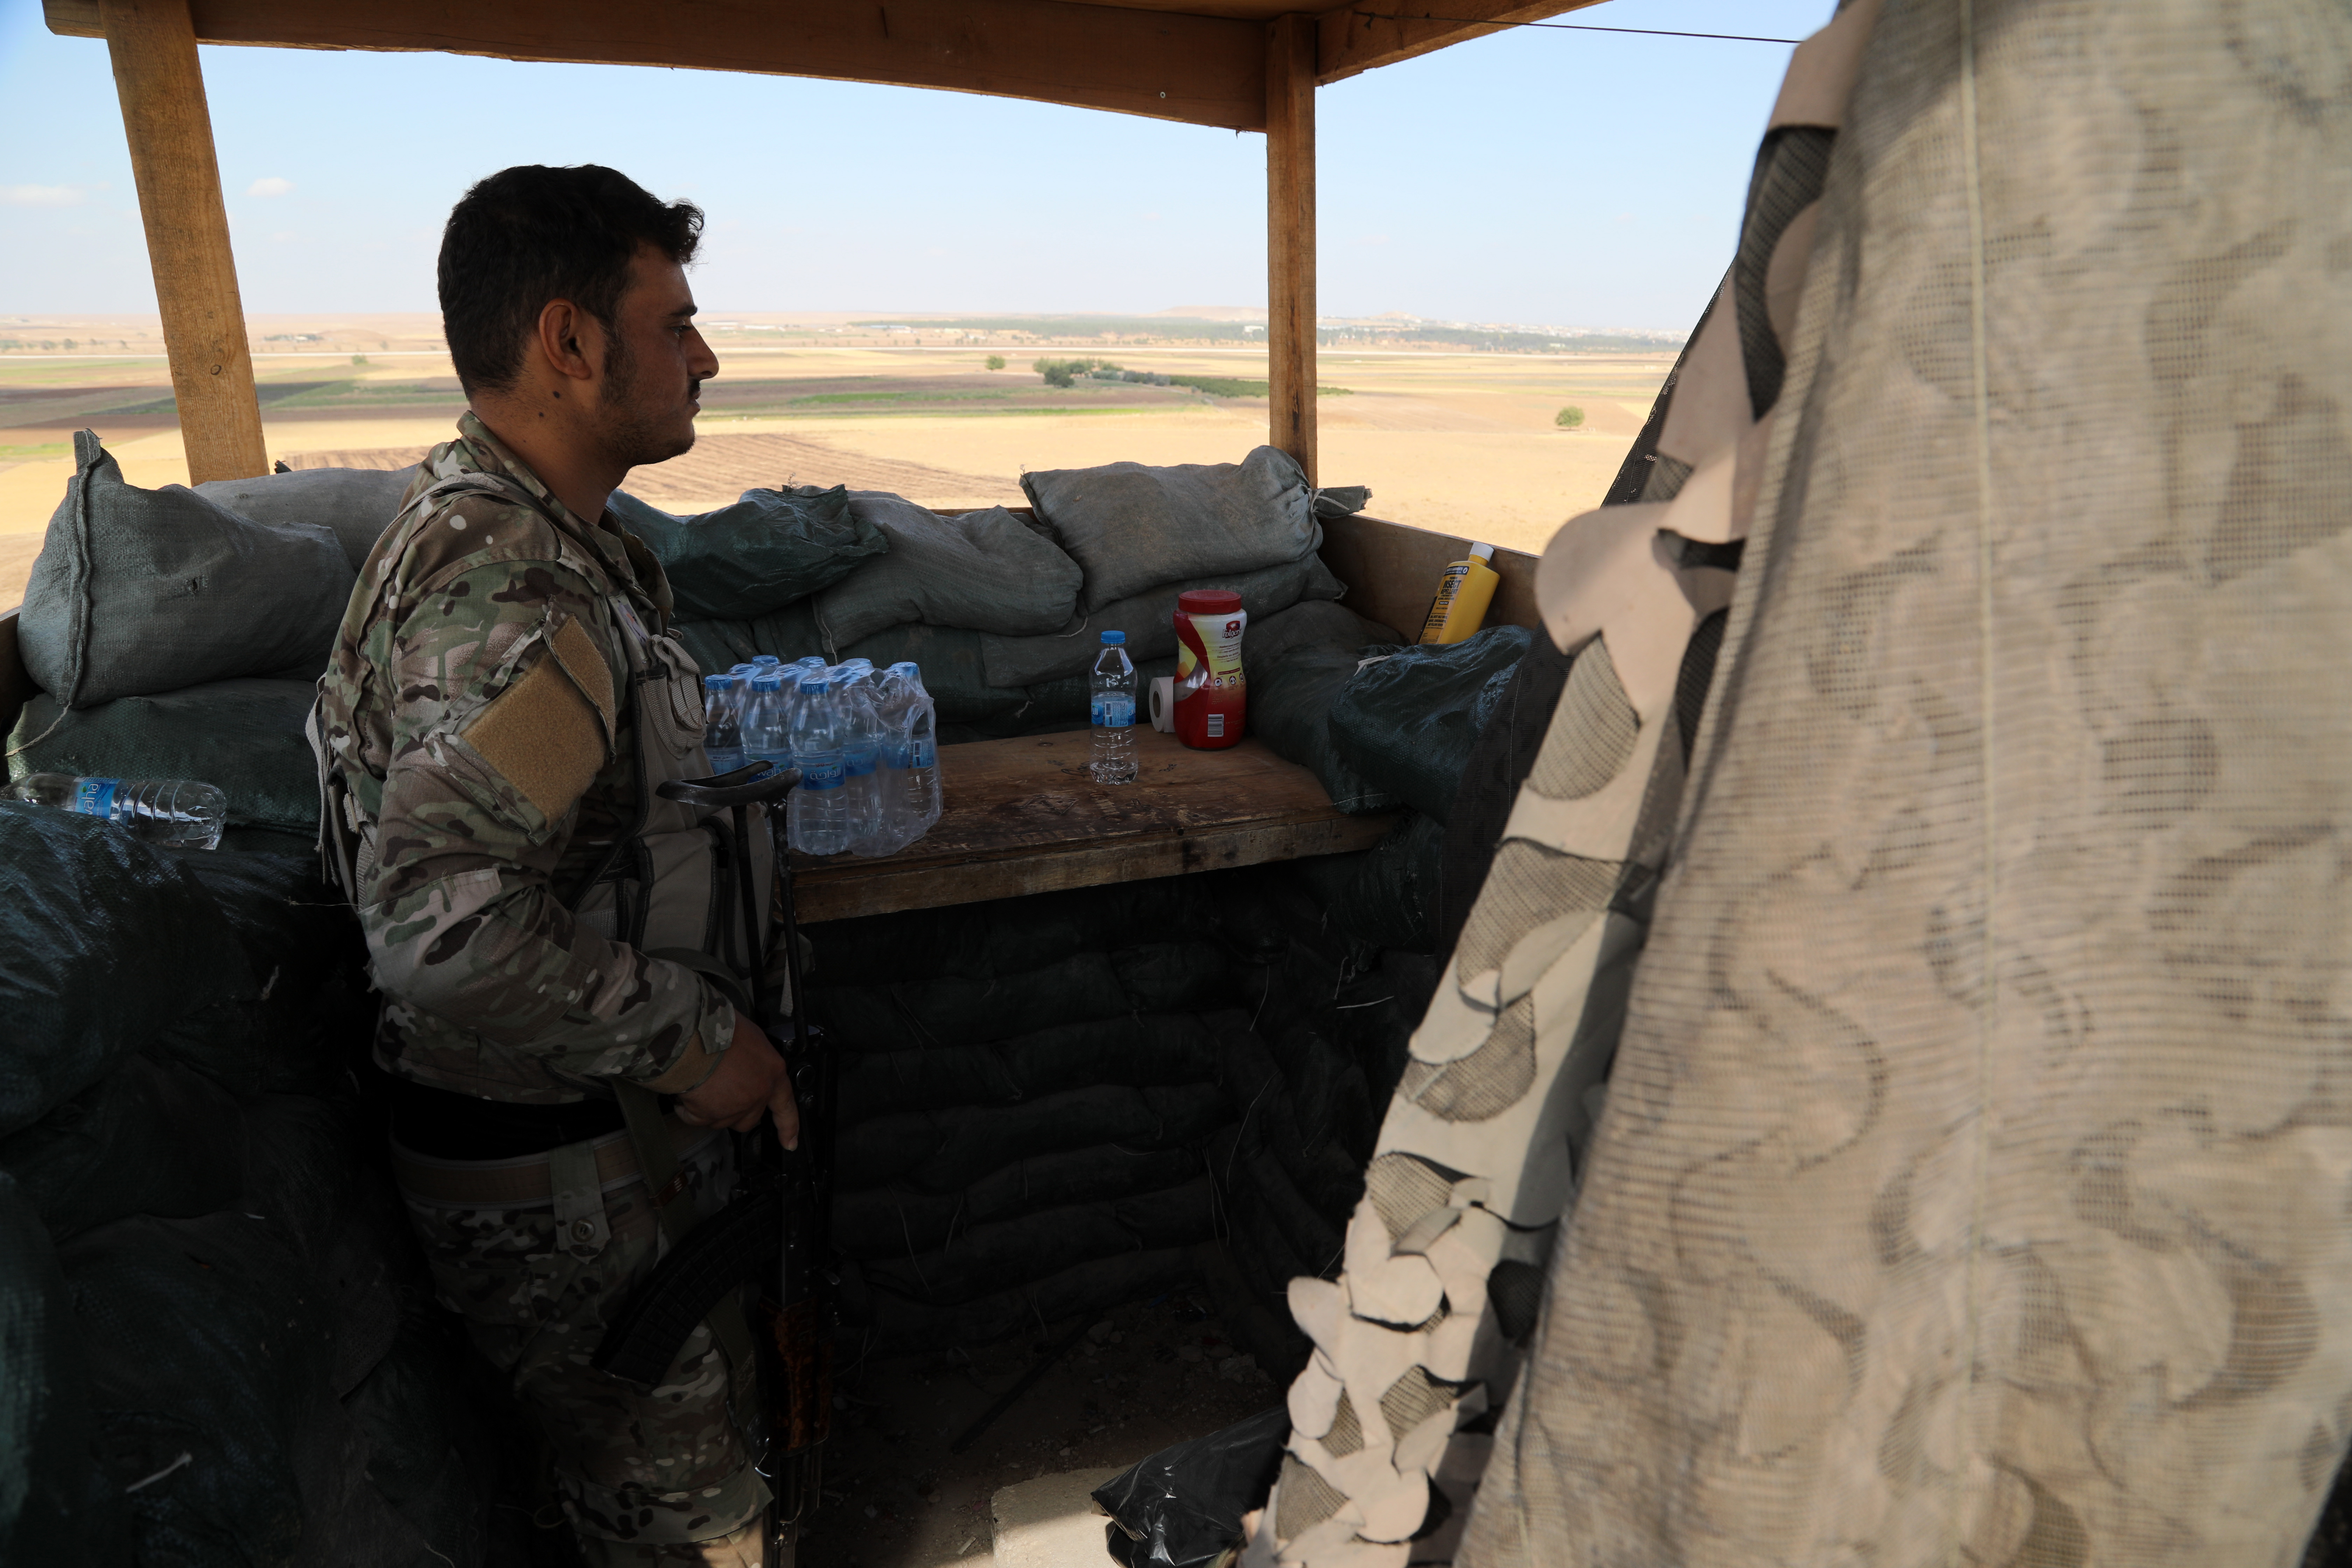 epa07907562 A fighter of the Self-Defense Forces (SDF) keeps watch towards the Turkish border after fighters moved to front lines near the border with Turkey, at Tal Arqam village, Ras al-Ein, north Syria, 07 October 2019 (issued 09 October 2019). US President Donald J. Trump announced the withdrawal of US troops from the area ahead of the anticipated action by Turkish President Recep Tayyip Erdogan.  EPA/STRINGER